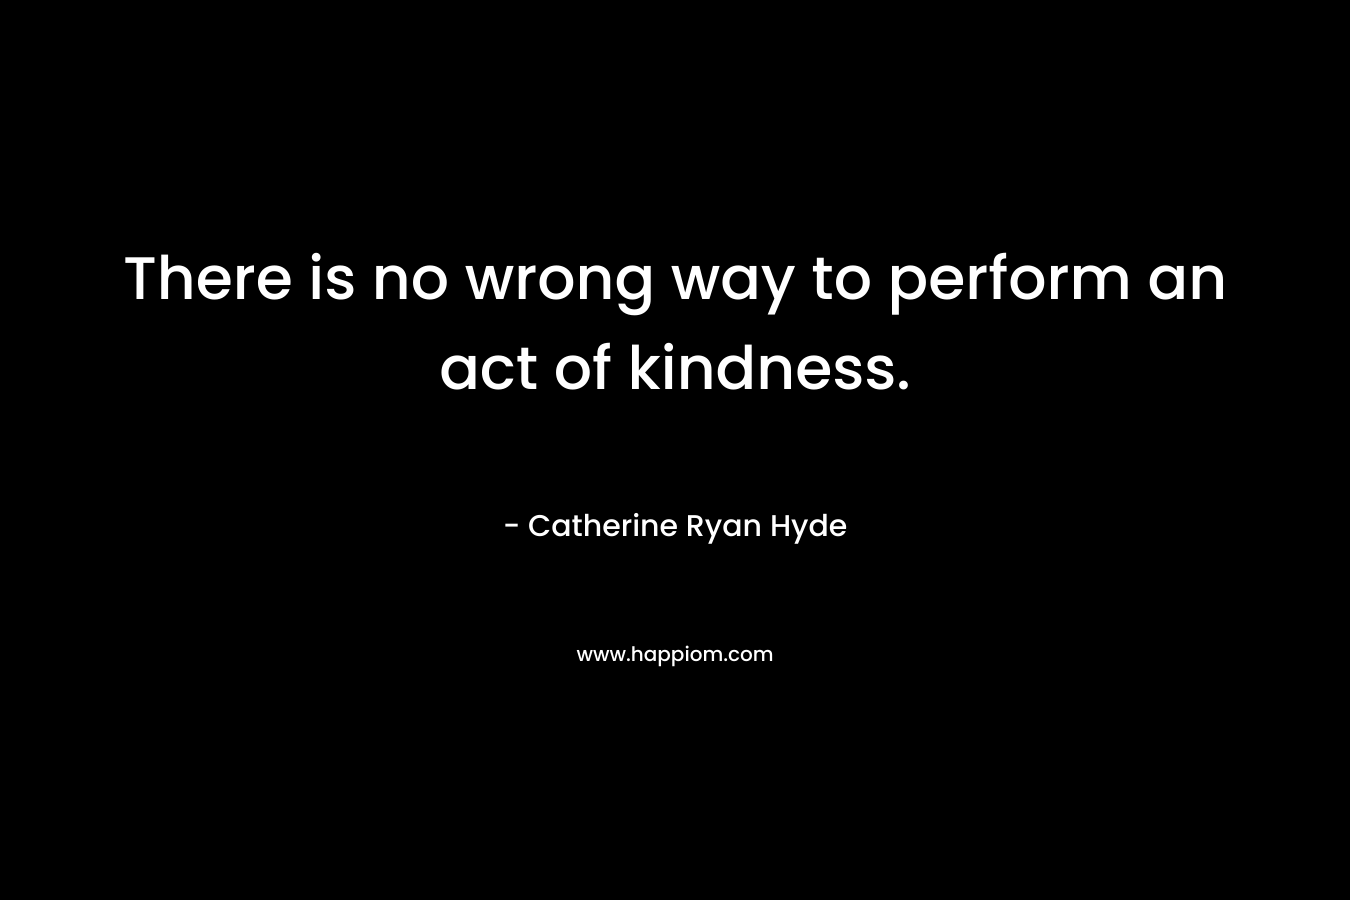 There is no wrong way to perform an act of kindness.